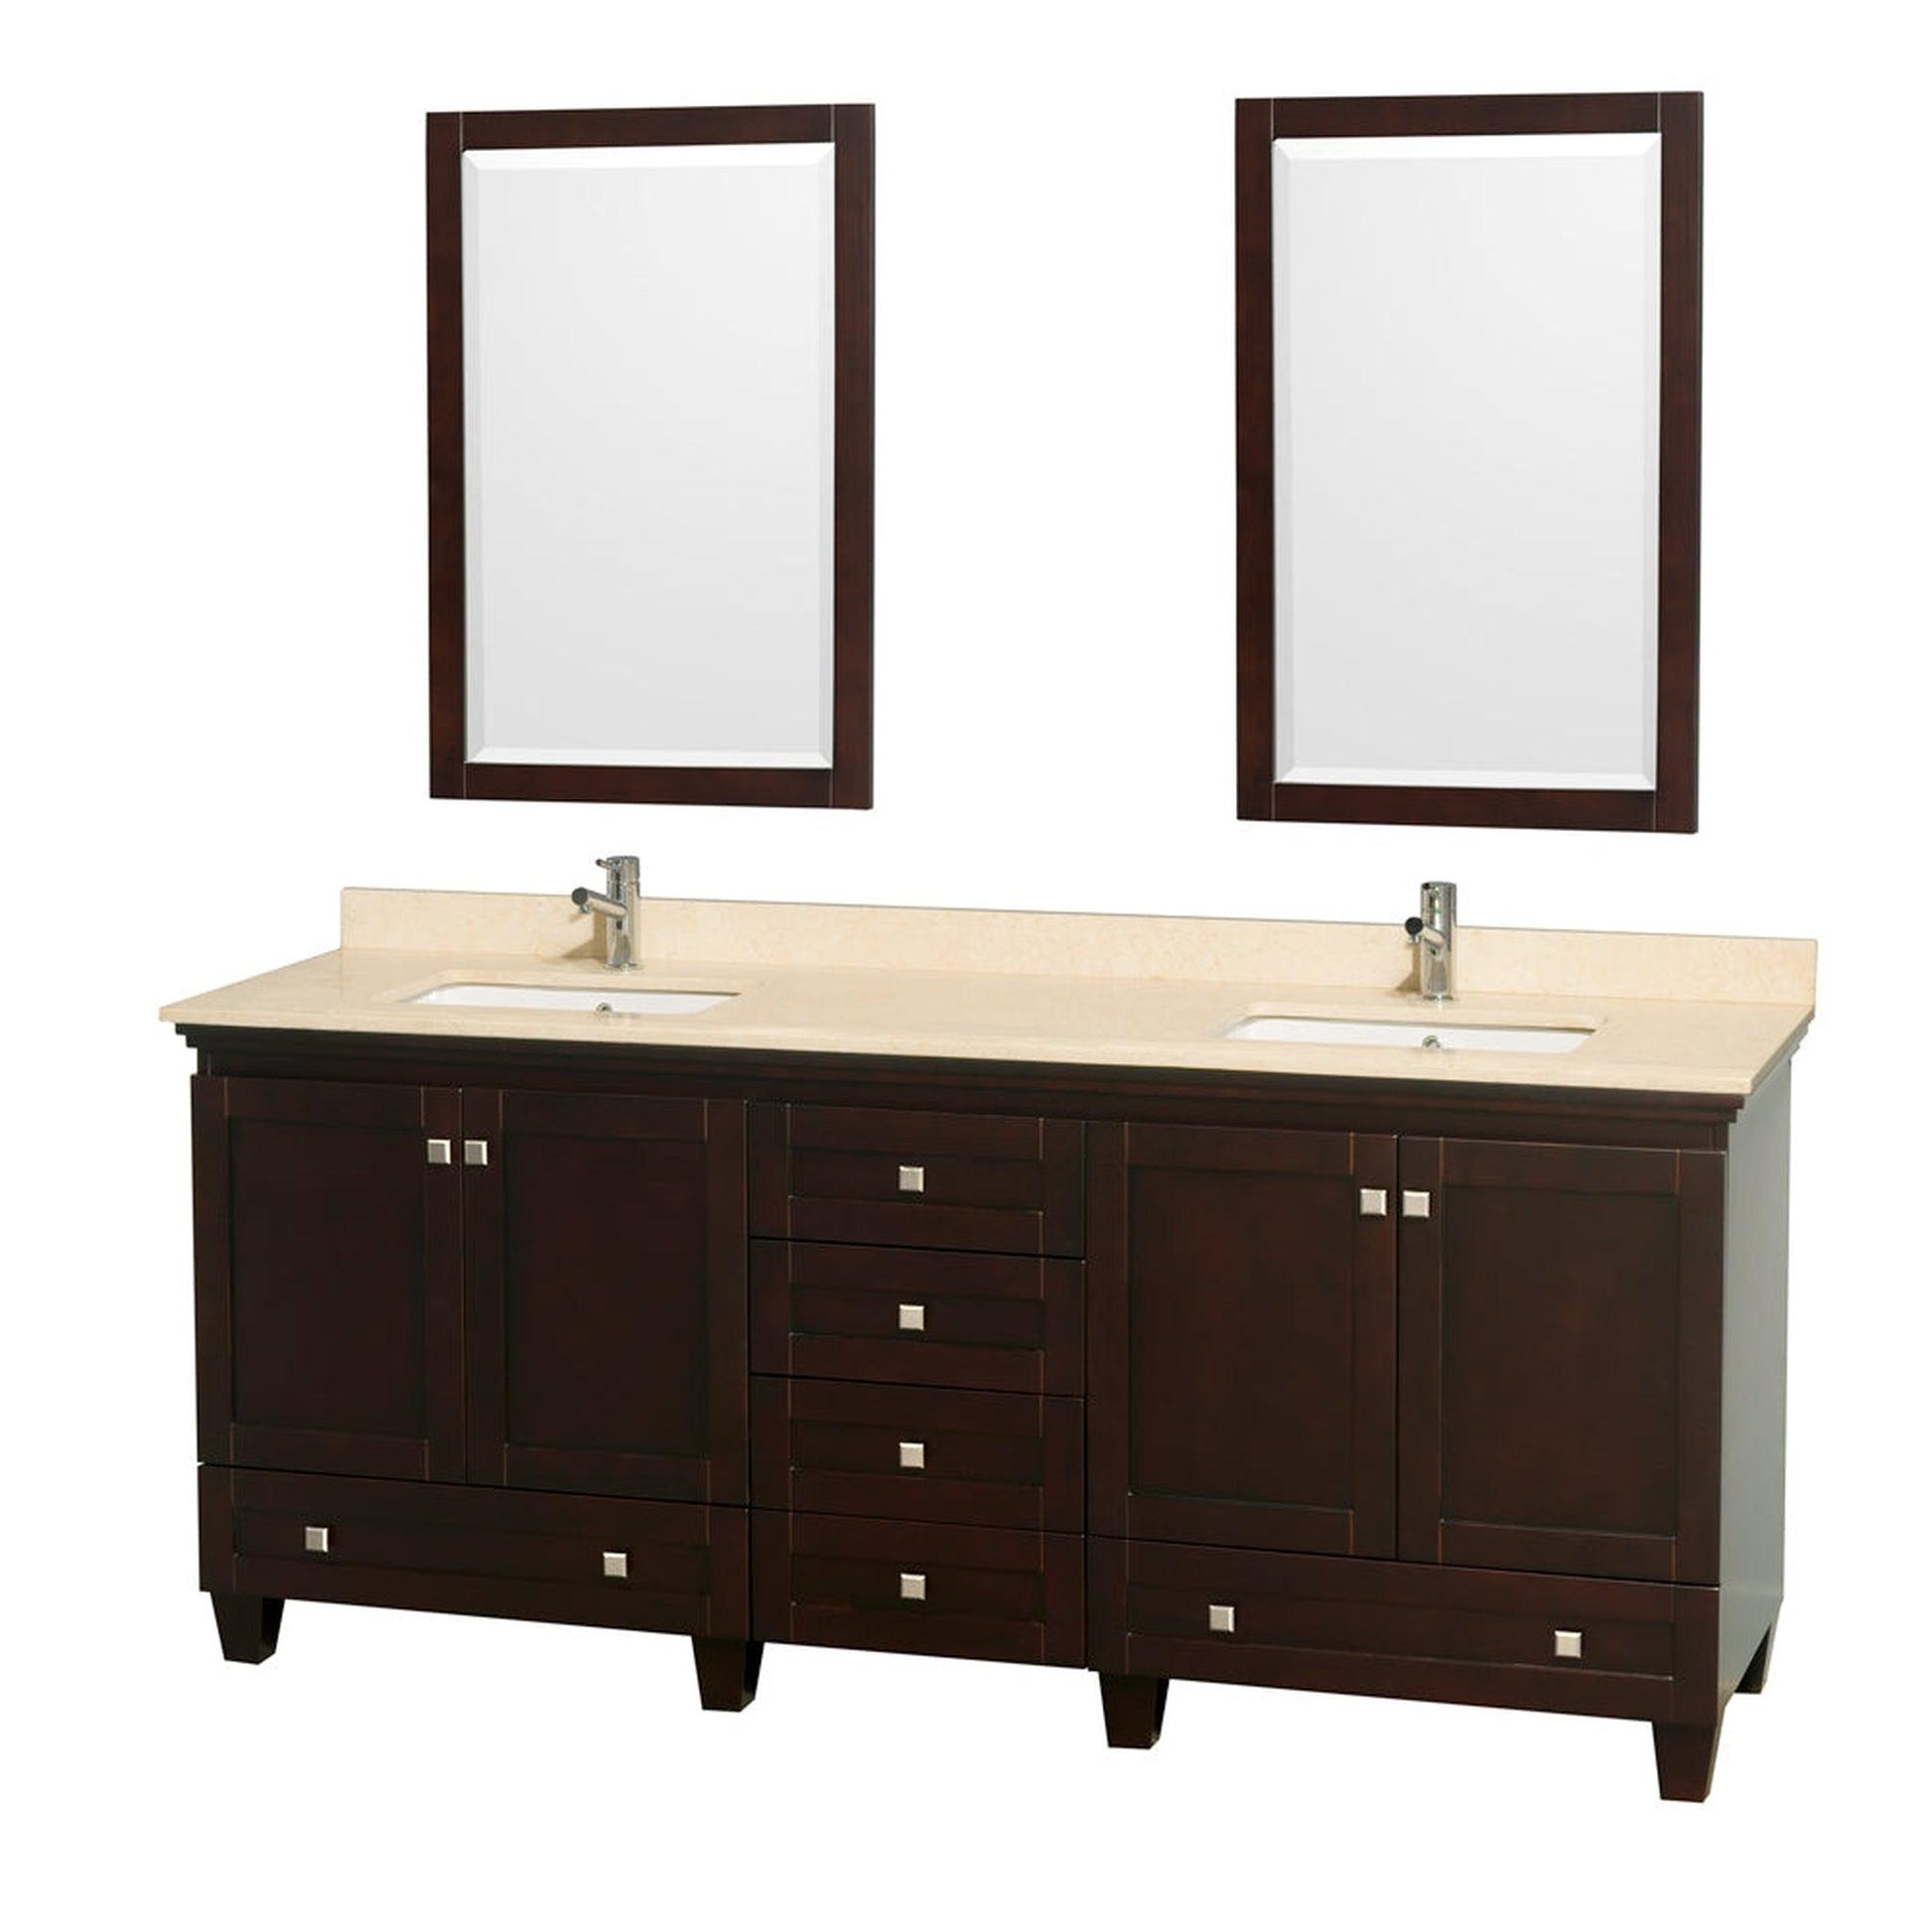 Wyndham Collection Acclaim 80" Double Bathroom Vanity in Espresso With Ivory Marble Countertop, Undermount Square Sink & 24" Mirror